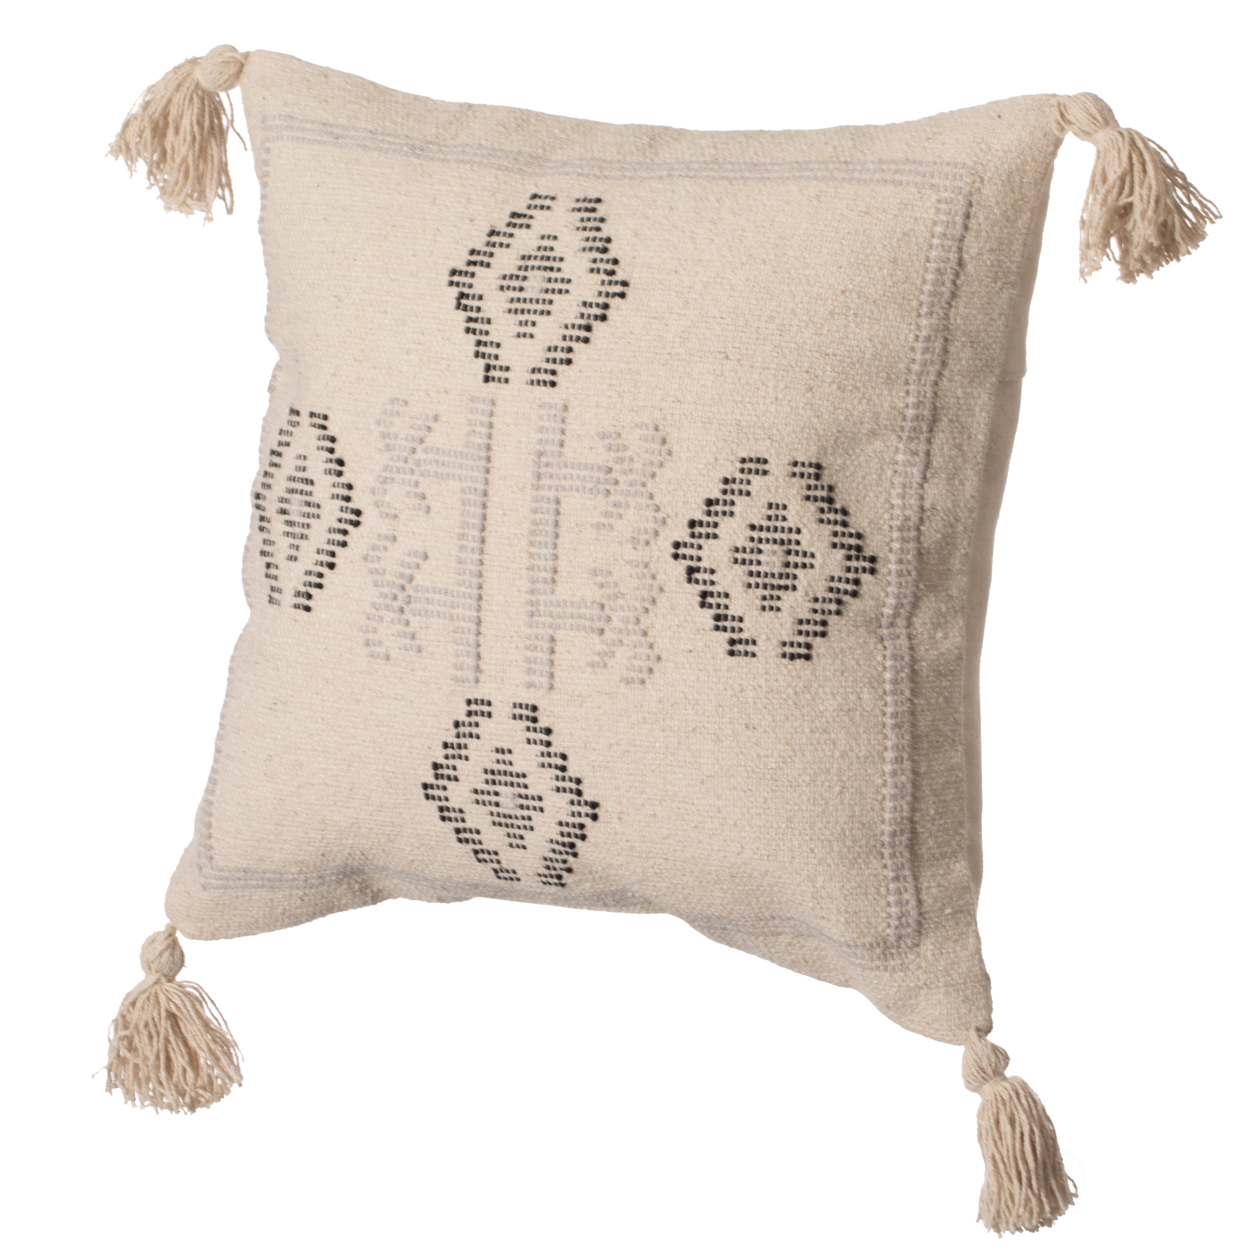 16 Handwoven Cotton Throw Pillow Cover With Tribal Aztec Design And Tassel Corners - Natural With Cushion